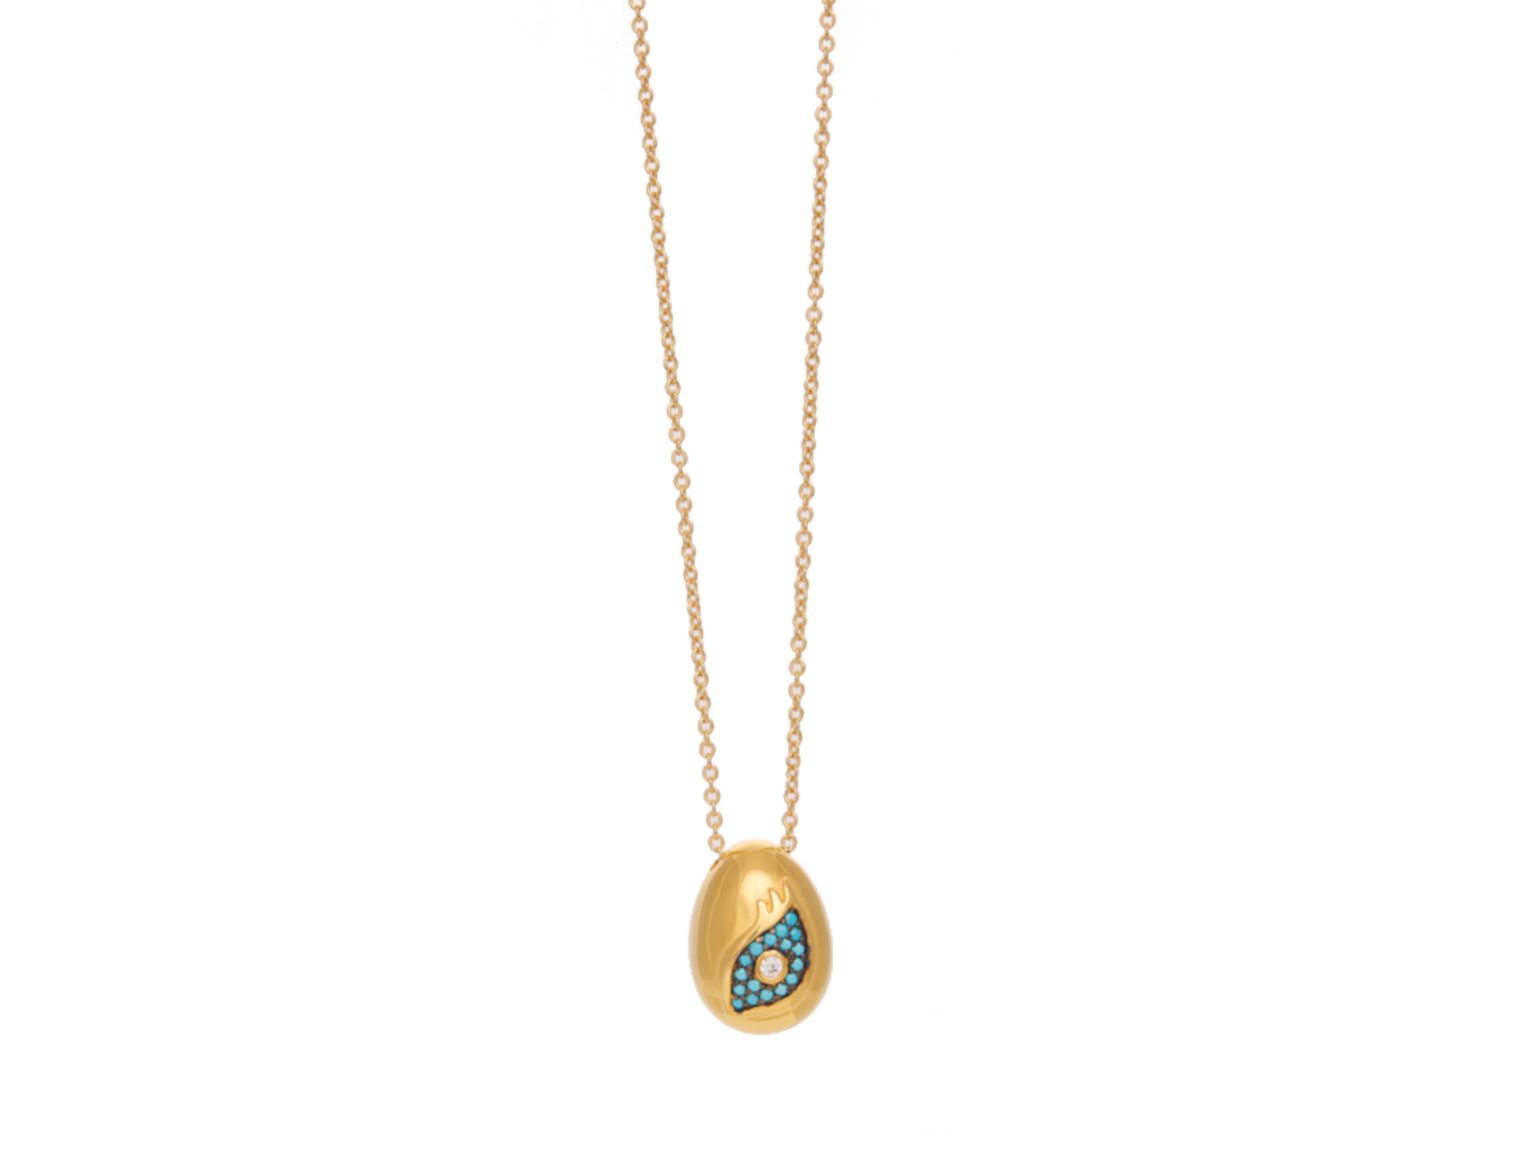 Gold plated pendant with turquoise eye